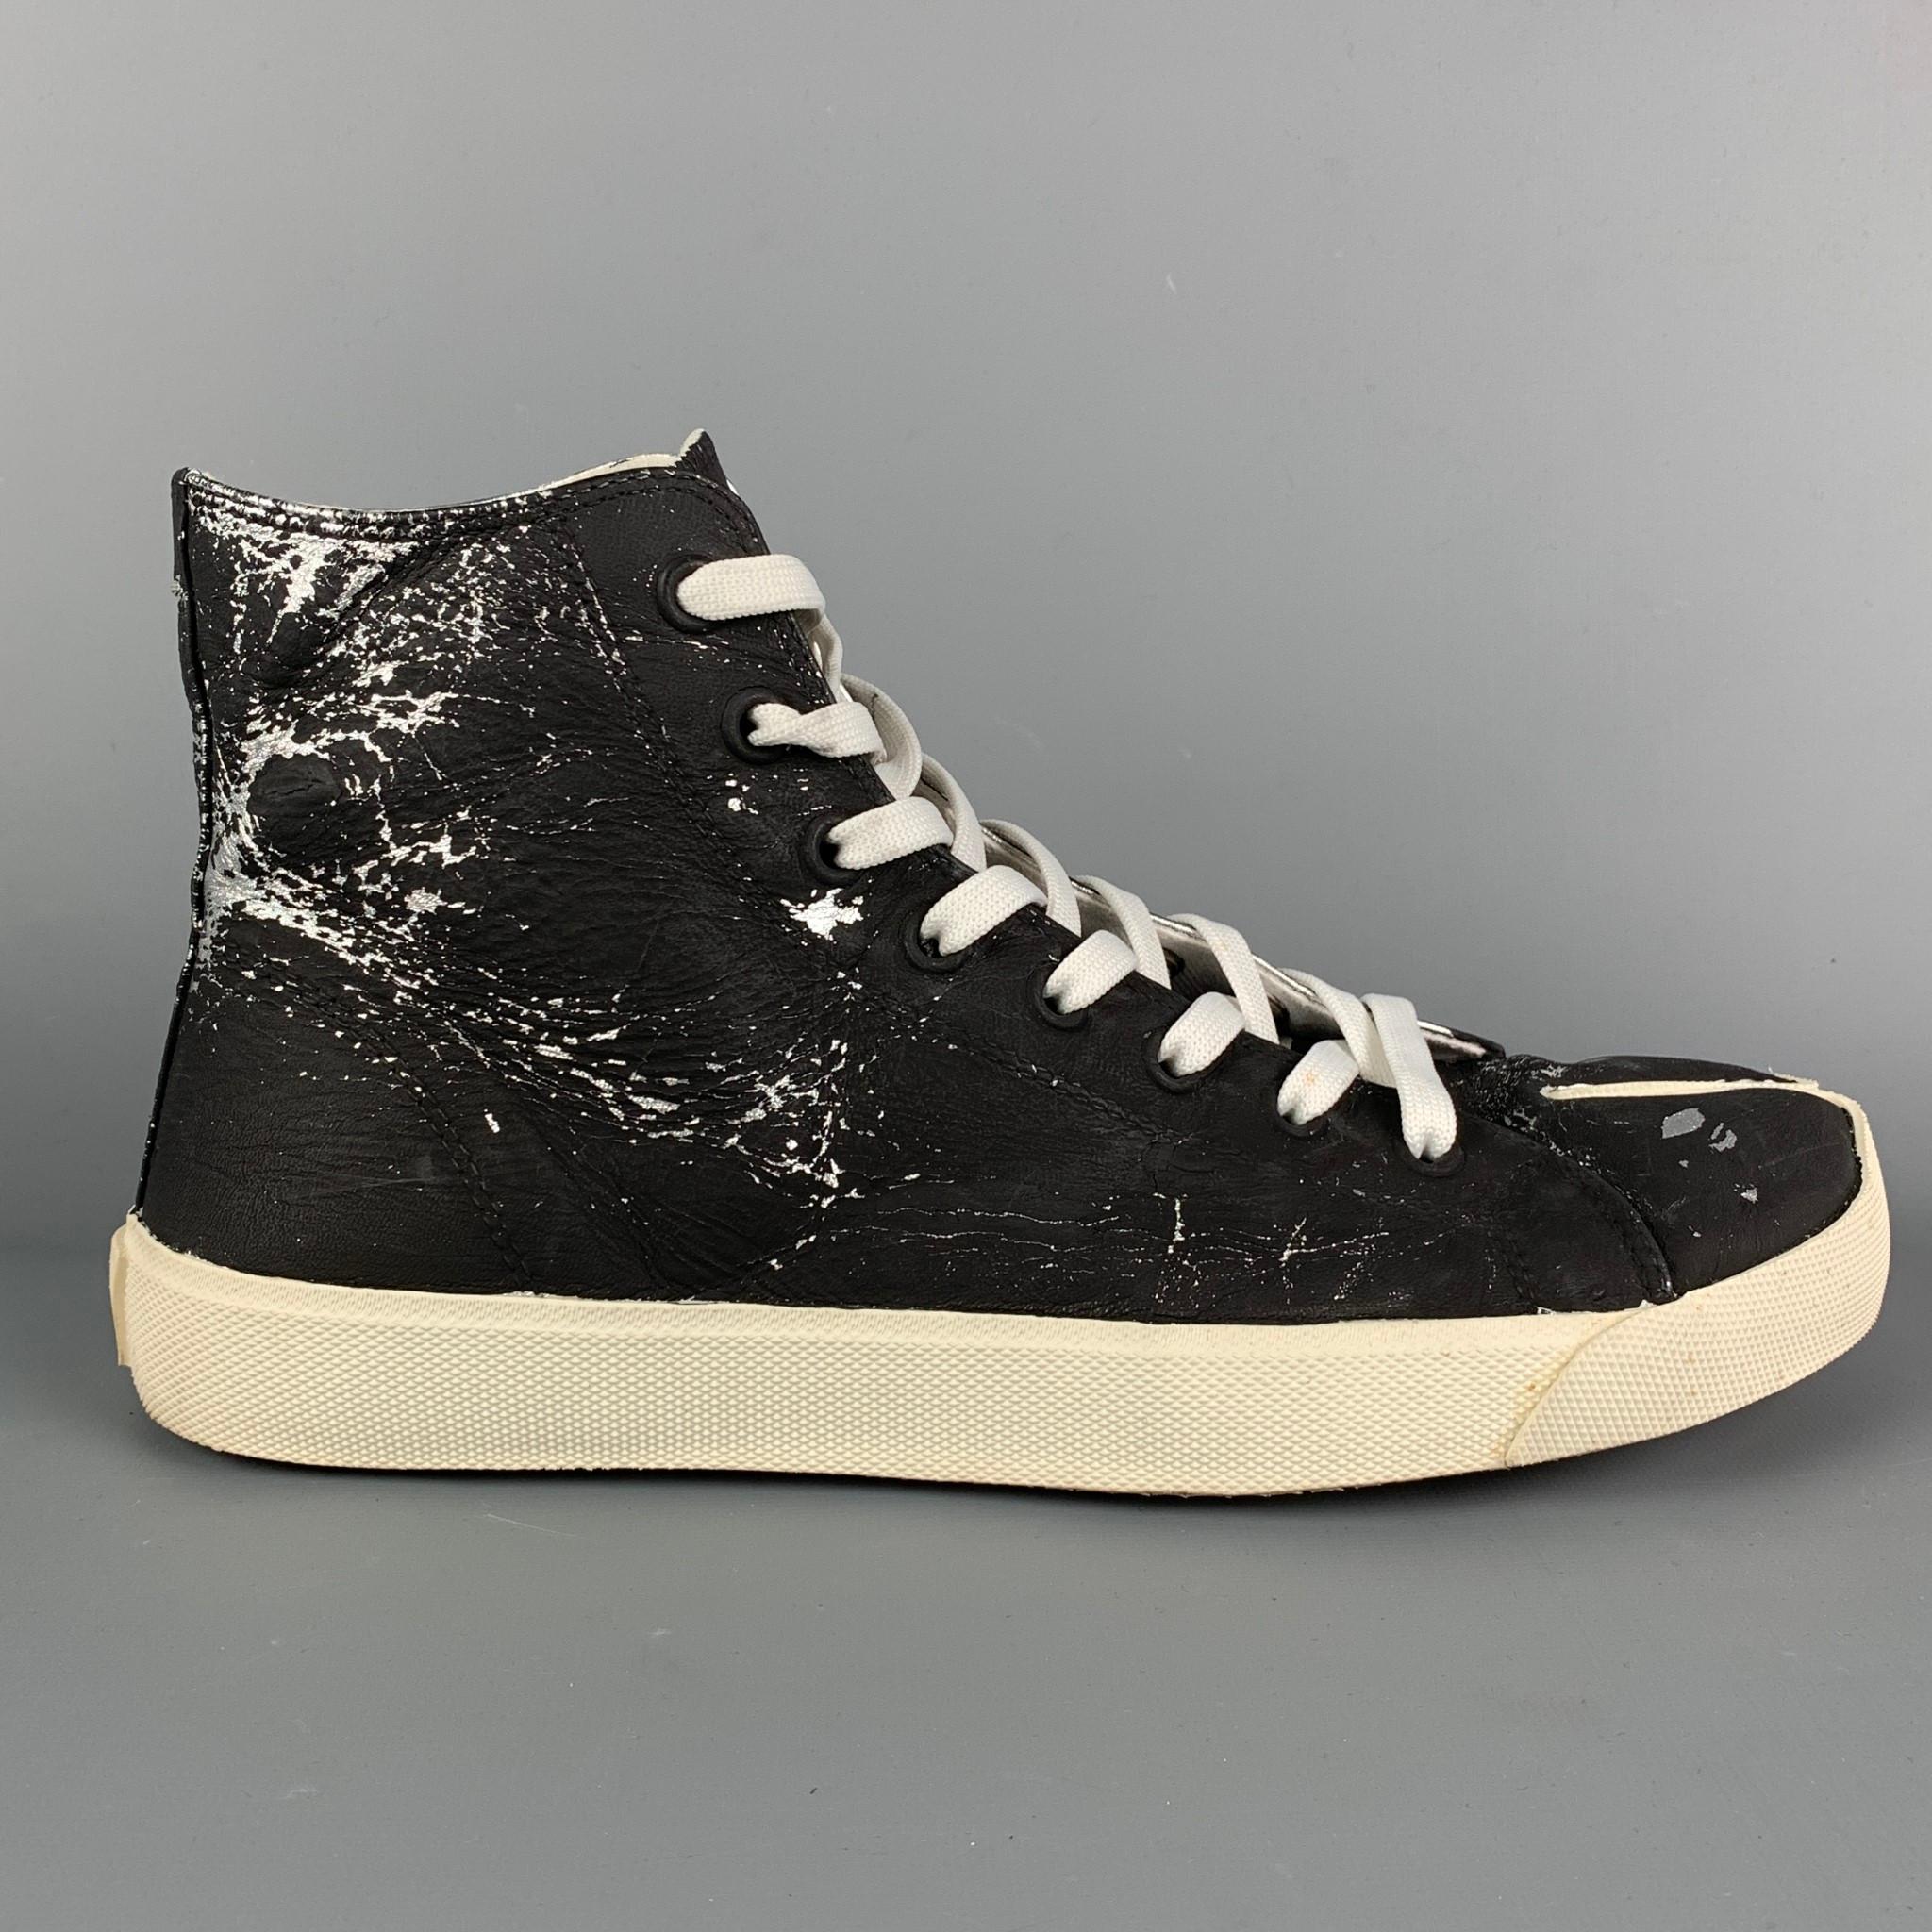 MAISON MARGIELA 'Tabi' sneakers comes in a black & silver painted canvas featuring a high top style, signature split toe design, rubber sole, and a lace up closure. Made in Italy. Includes box. 

Excellent Pre-Owned Condition.
Marked: 43

Outsole: